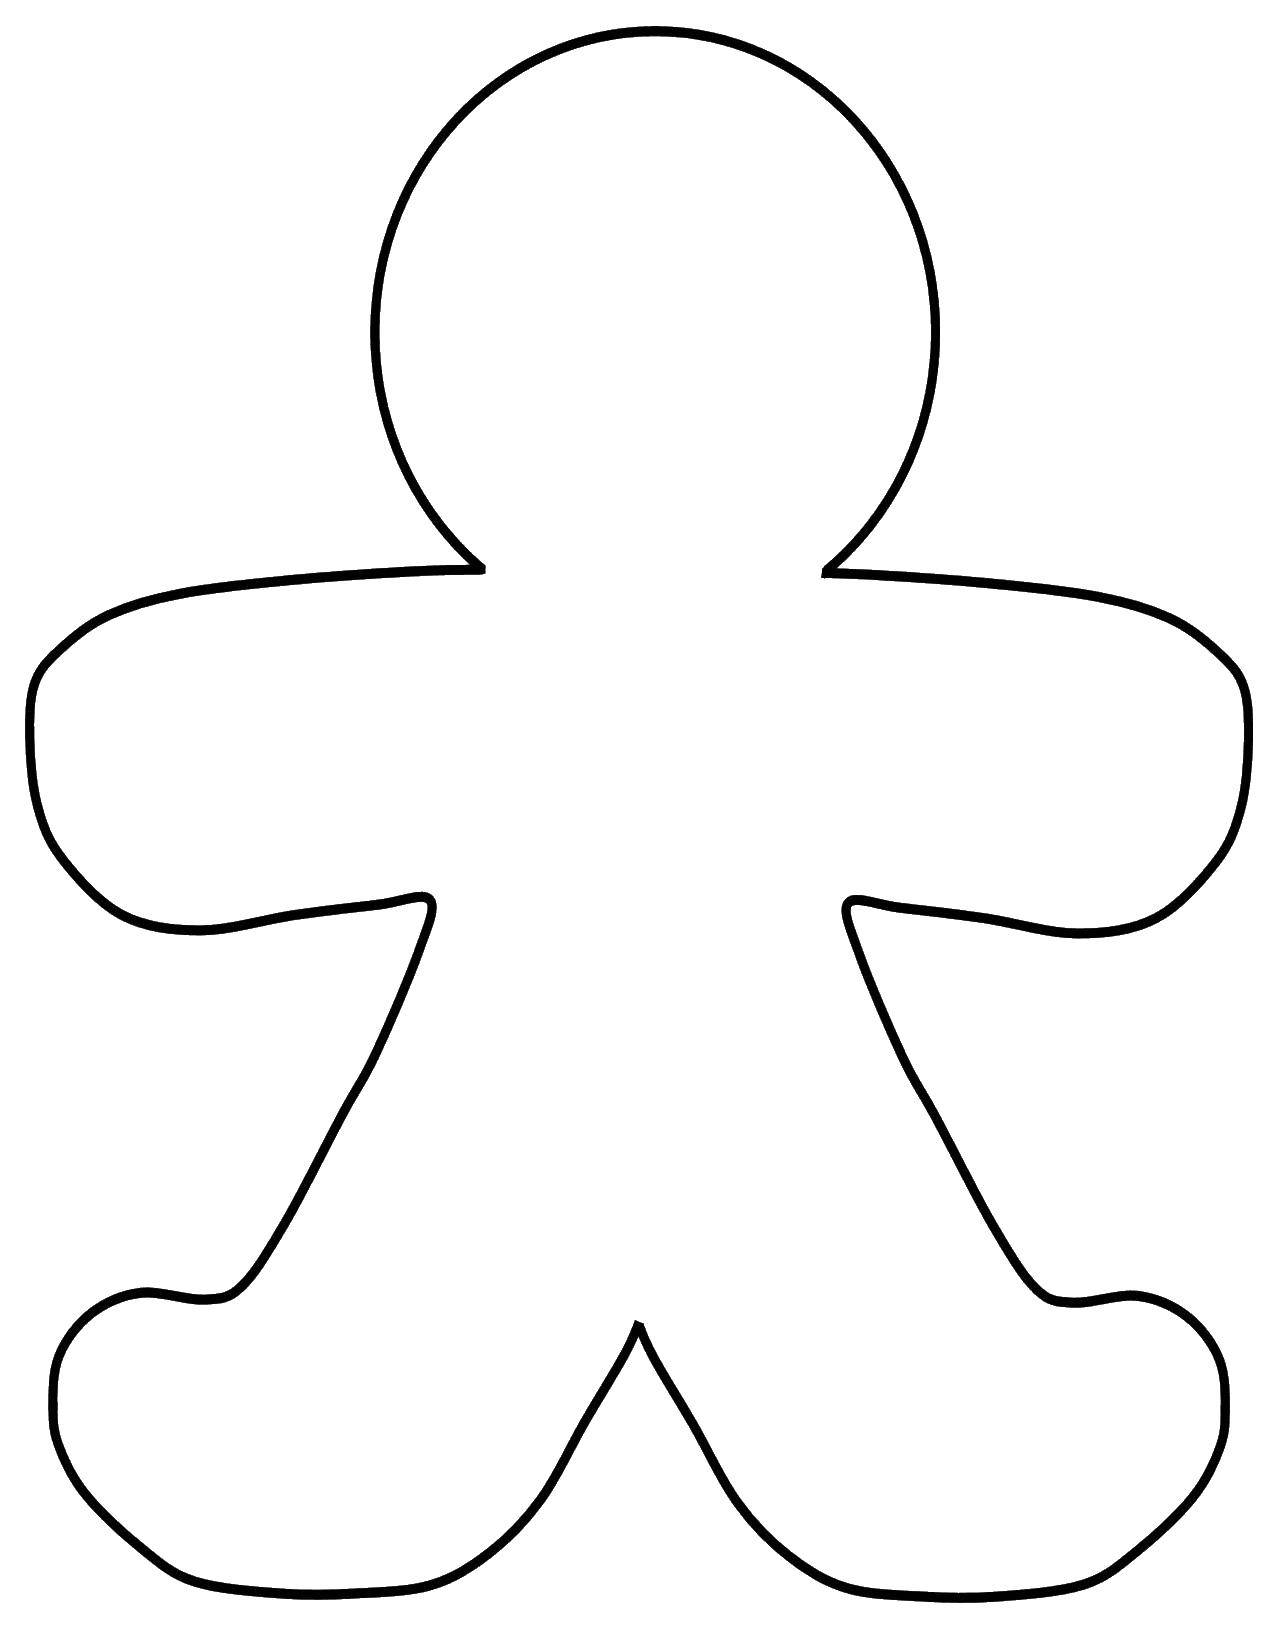 Coloring The gingerbread man. Category The contours of a person to cut. Tags:  Outline .